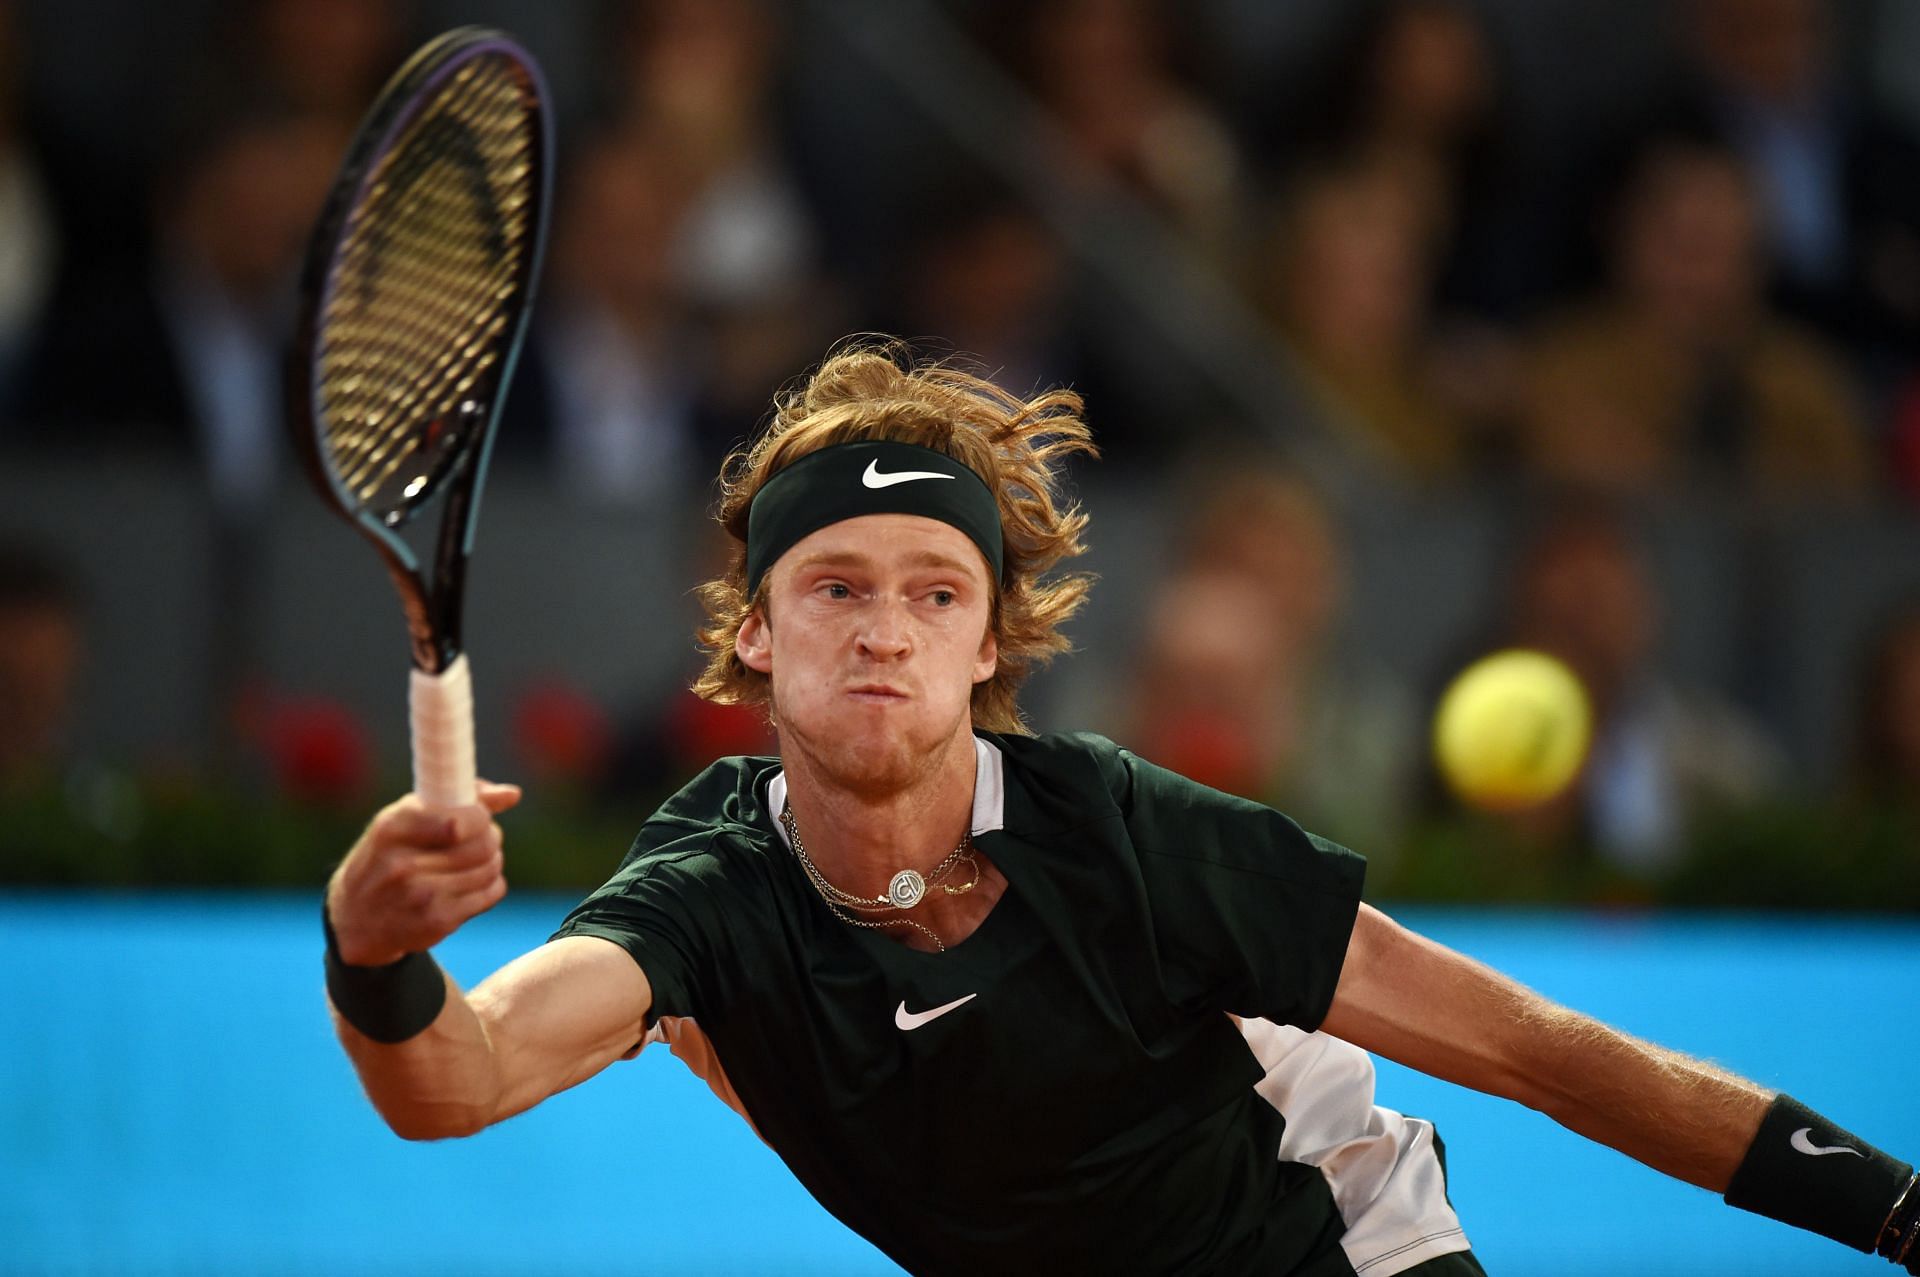 Rublev lost to Tsitispas in the quarterfinals at Madrid